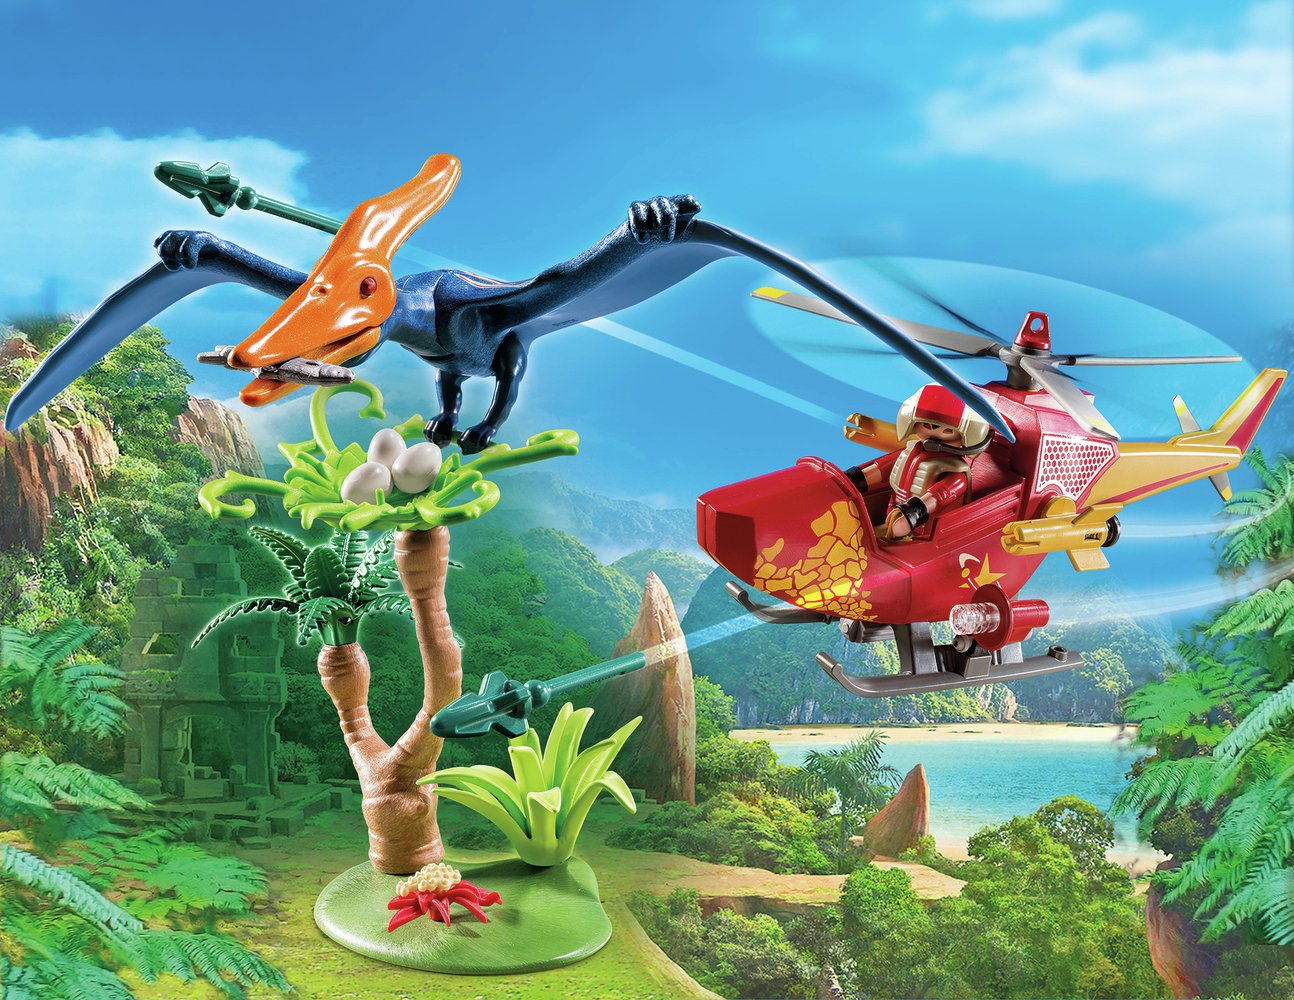 Playmobil 9430 Dinos Adventure Copter with Pterodactyl Review